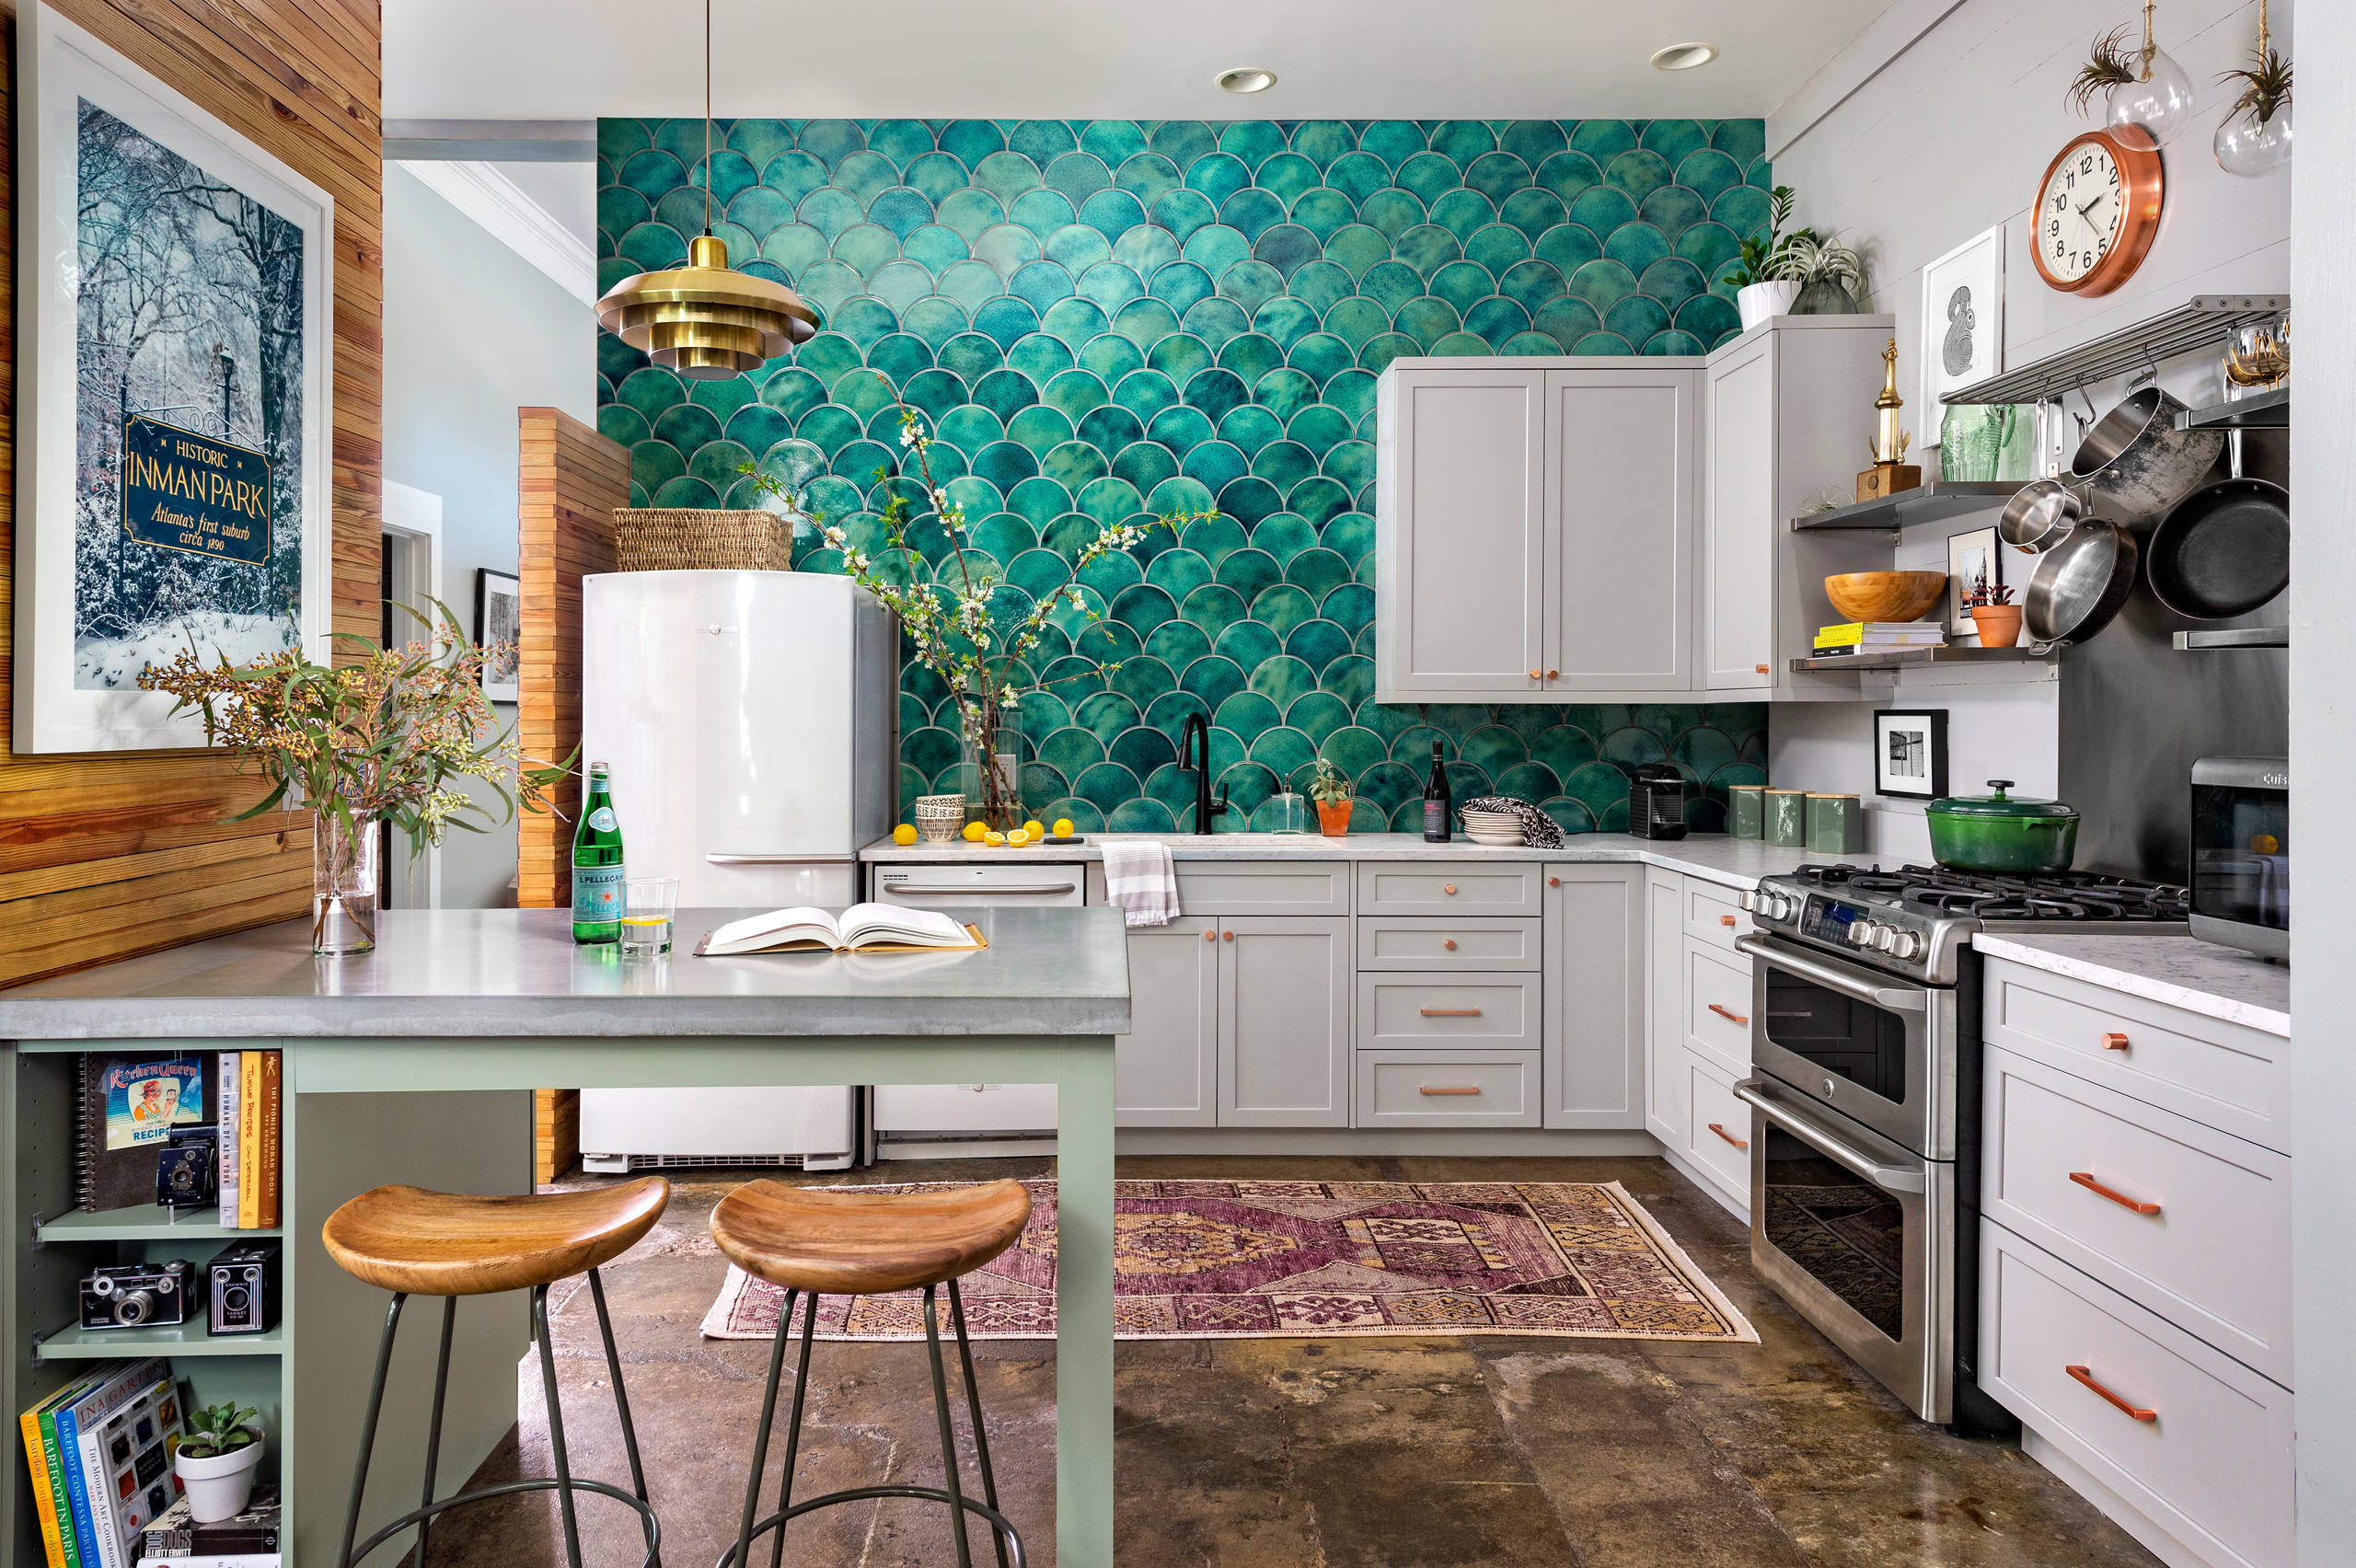 Find 73+ Captivating eclectic island kitchen design Voted By The Construction Association